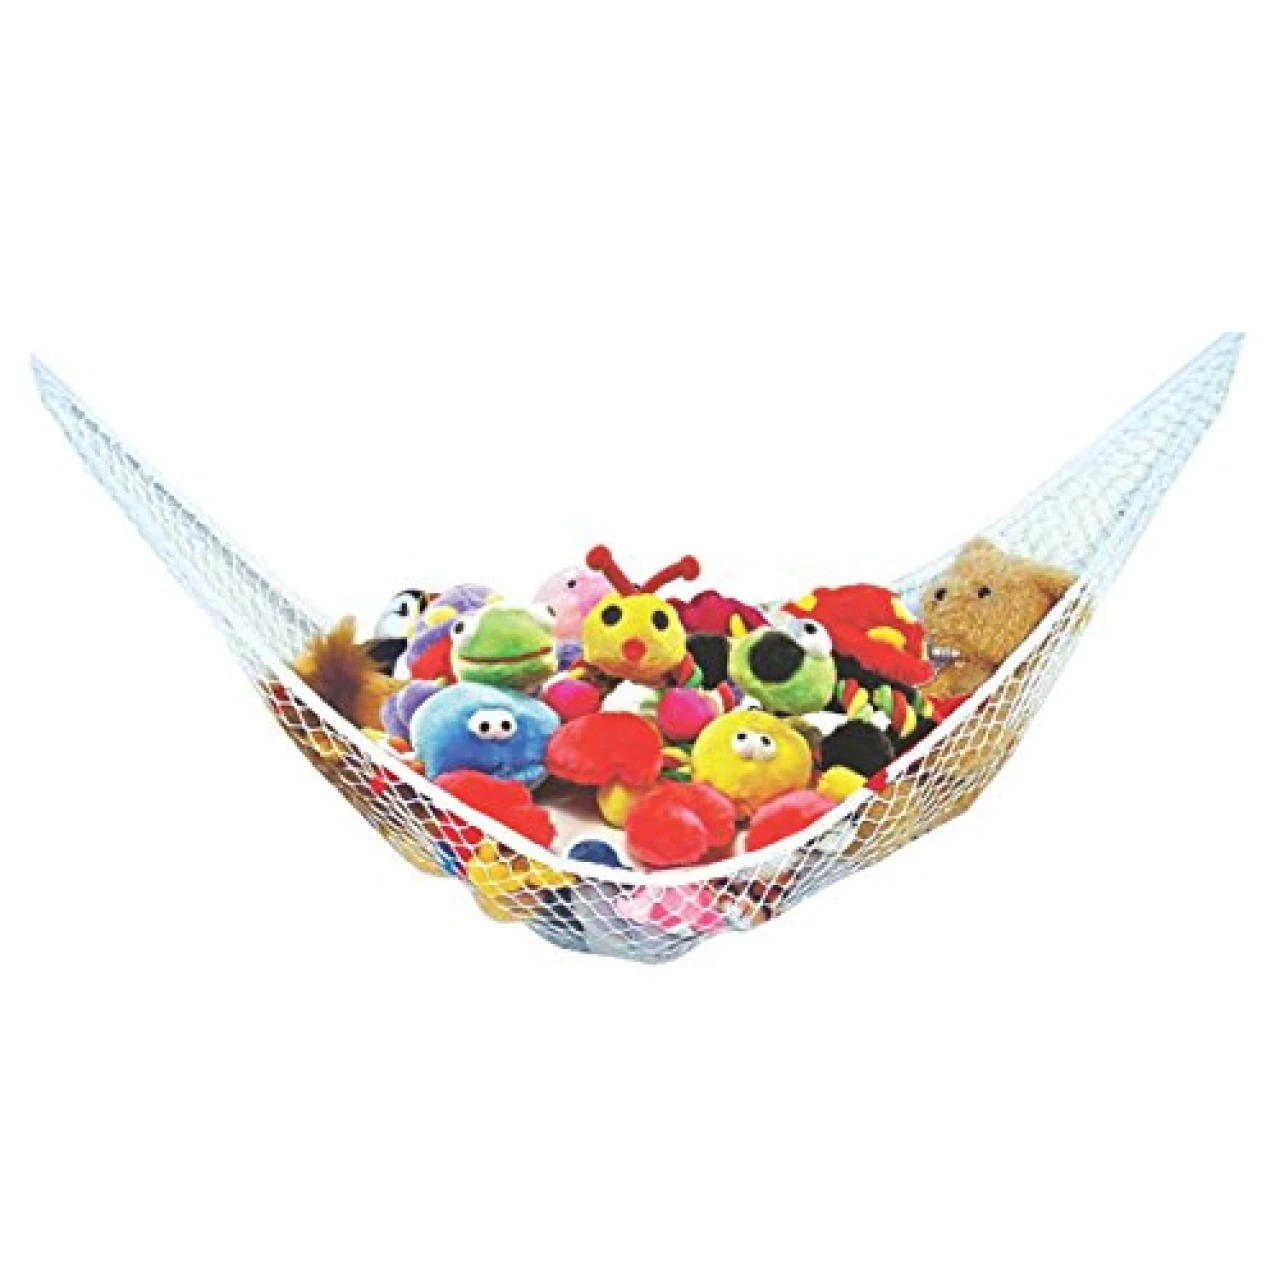 Enovoe Stuffed Animal Toy Hammock - Hanging Storage Net - Toy Organizer for Clean, Organized and Orderly Room